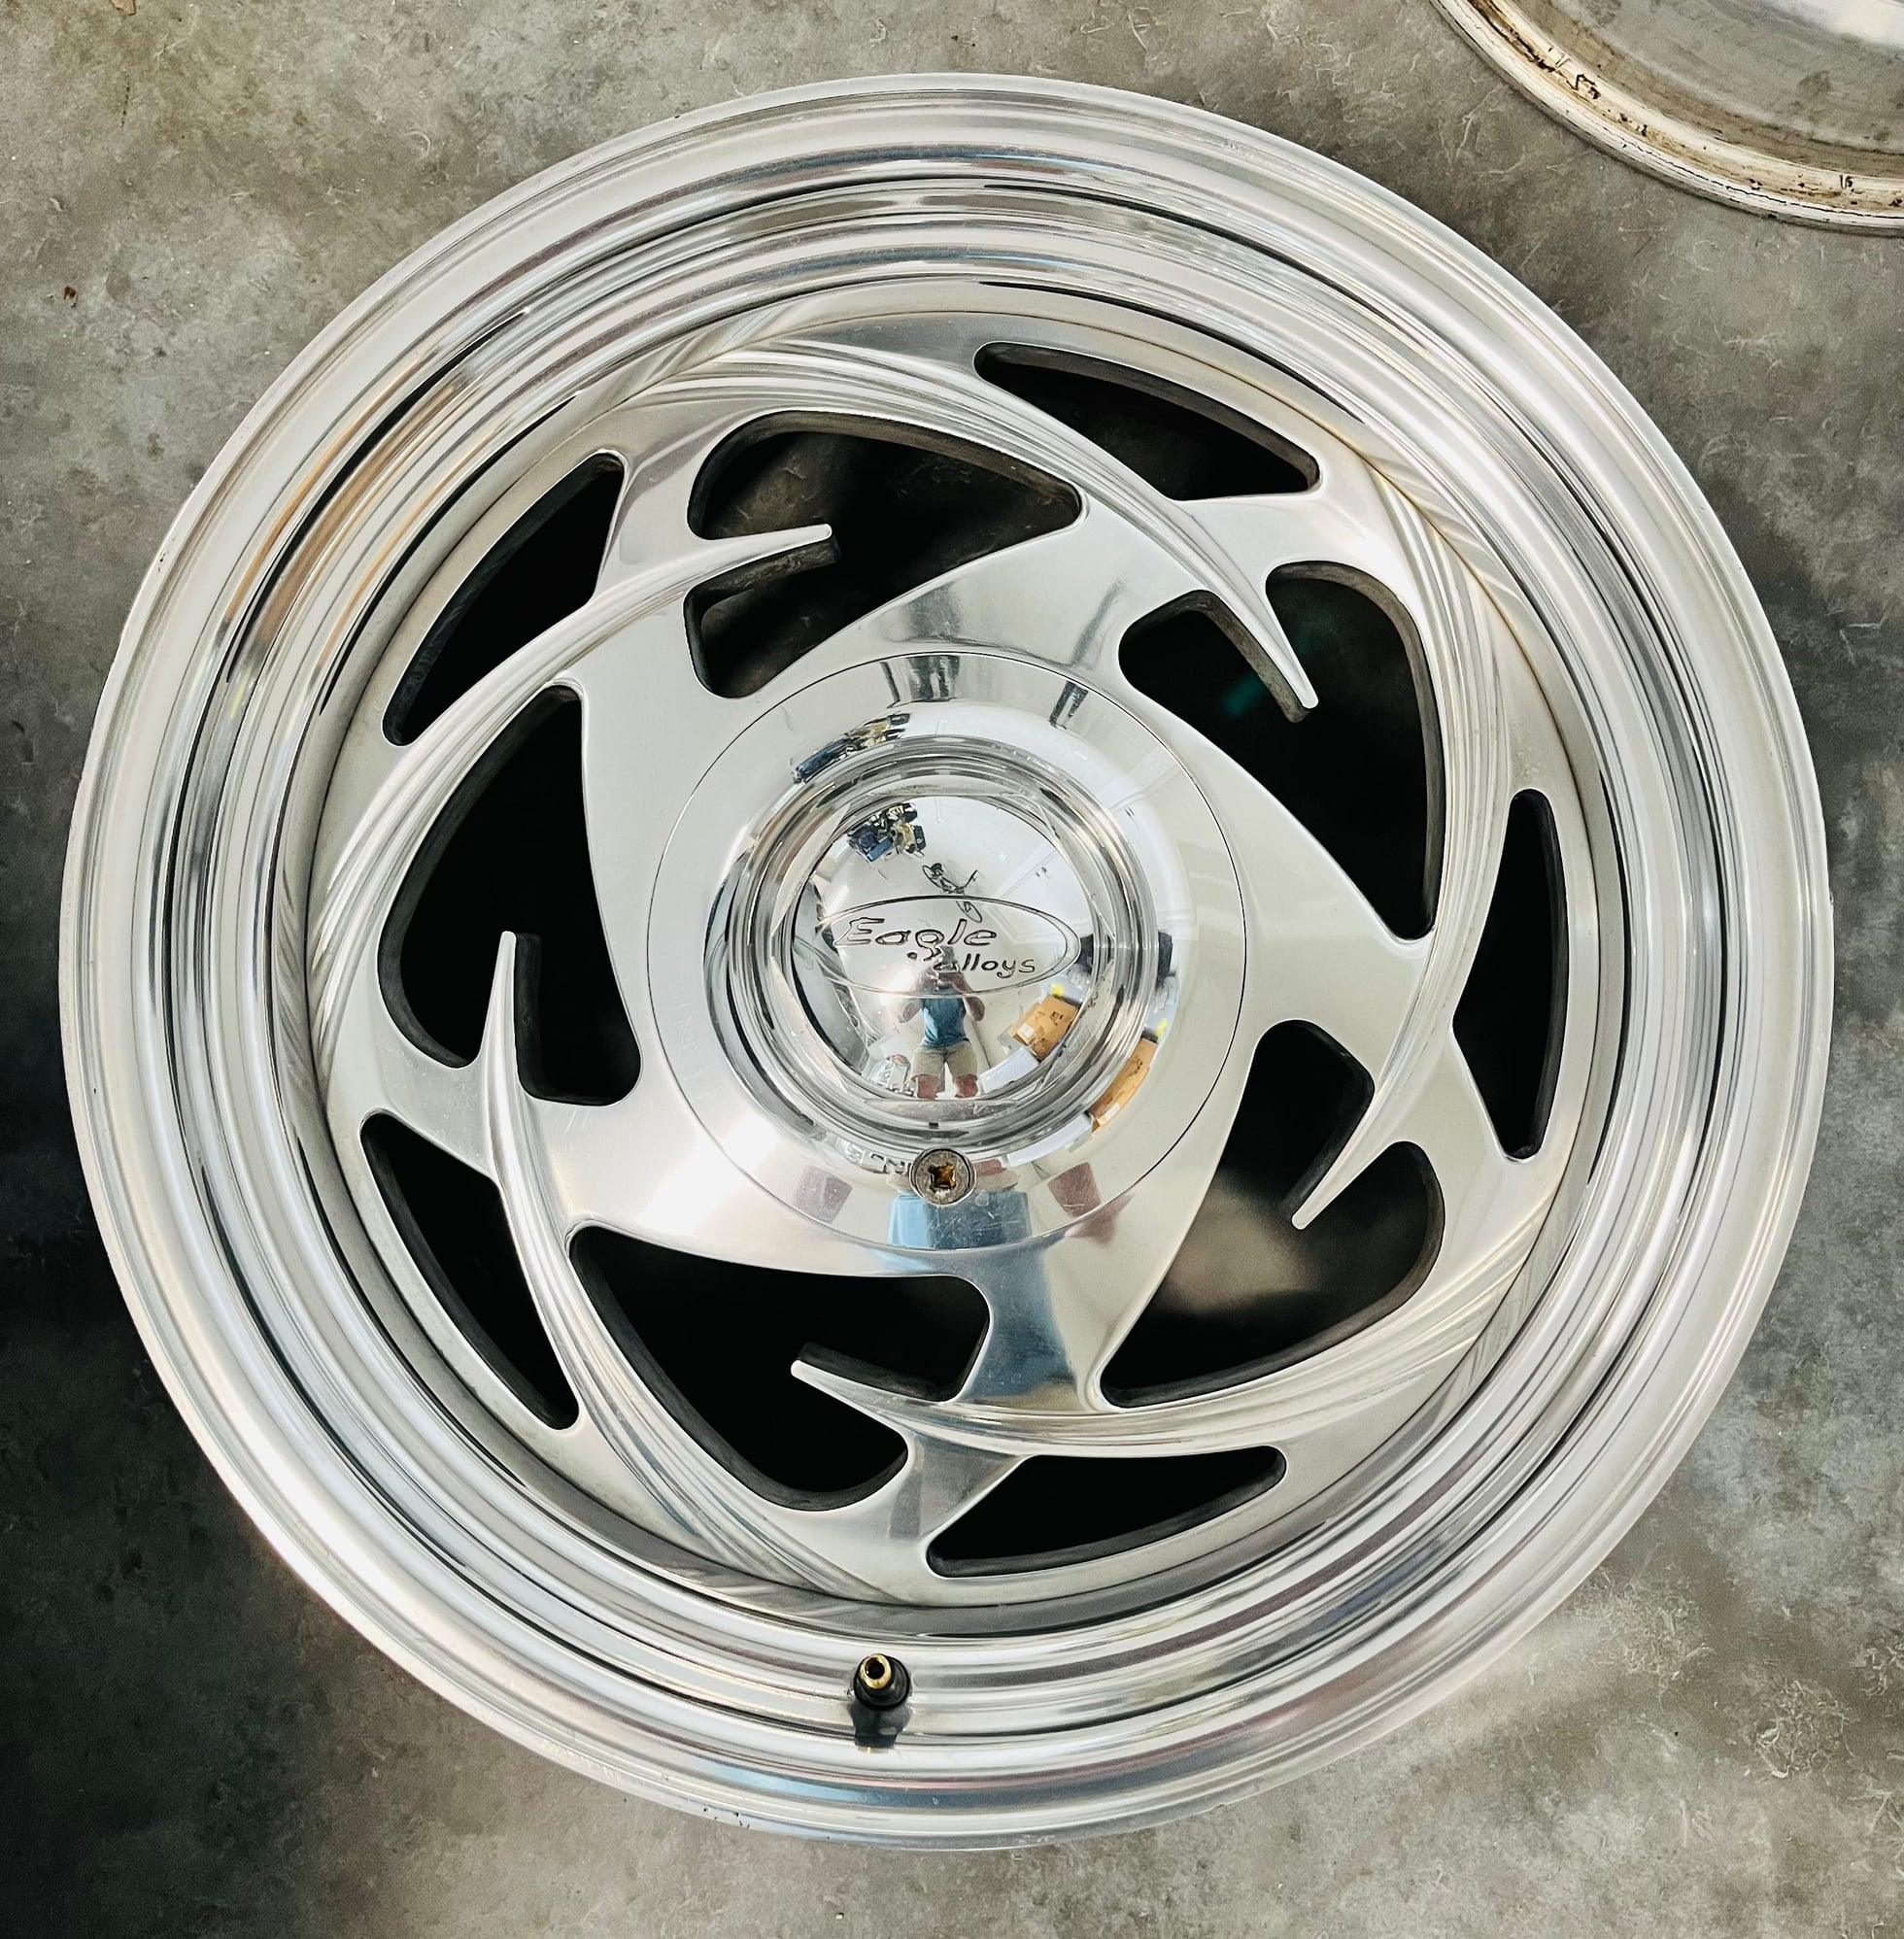 Wheels and Tires/Axles - Eagle Alloys series 203 - Used - All Years Chevrolet All Models - St. Cloud, FL 34769, United States